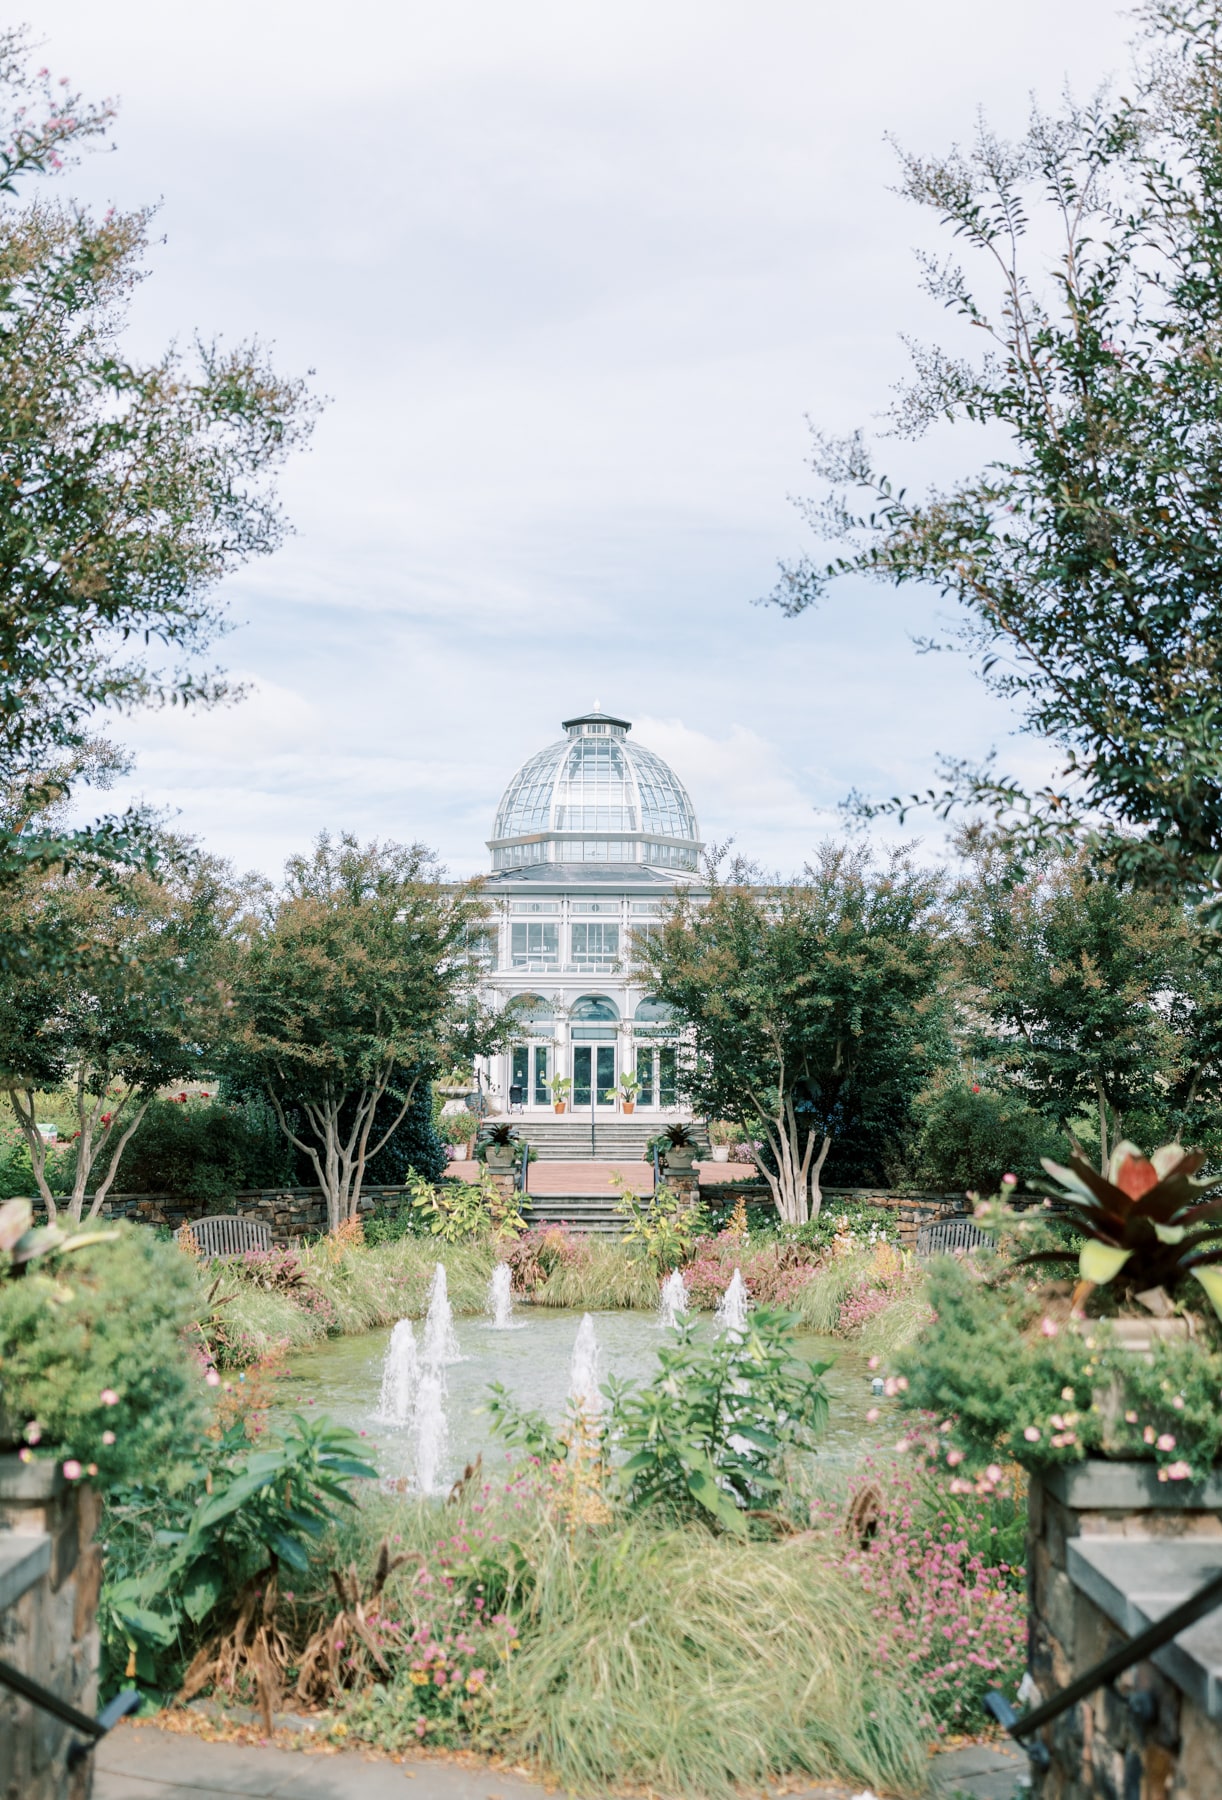 The stunning domed Conservatory at Lewis Ginter Gardens